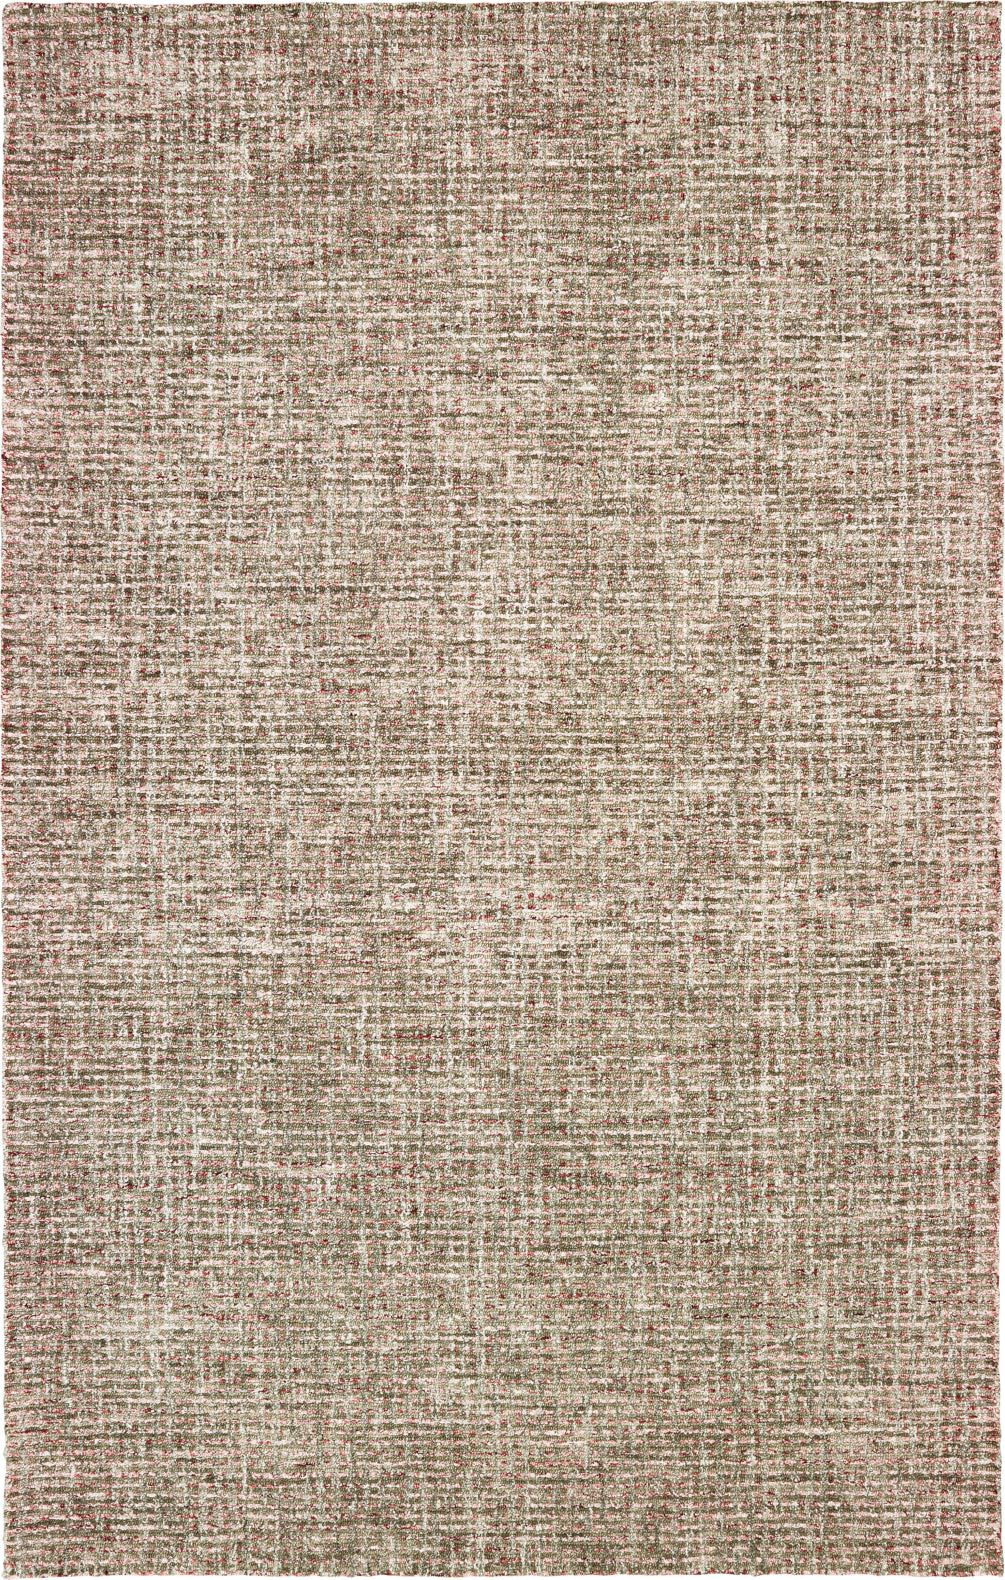 LR Resources Criss Cross 81300 Brown / Red Area Rug main image